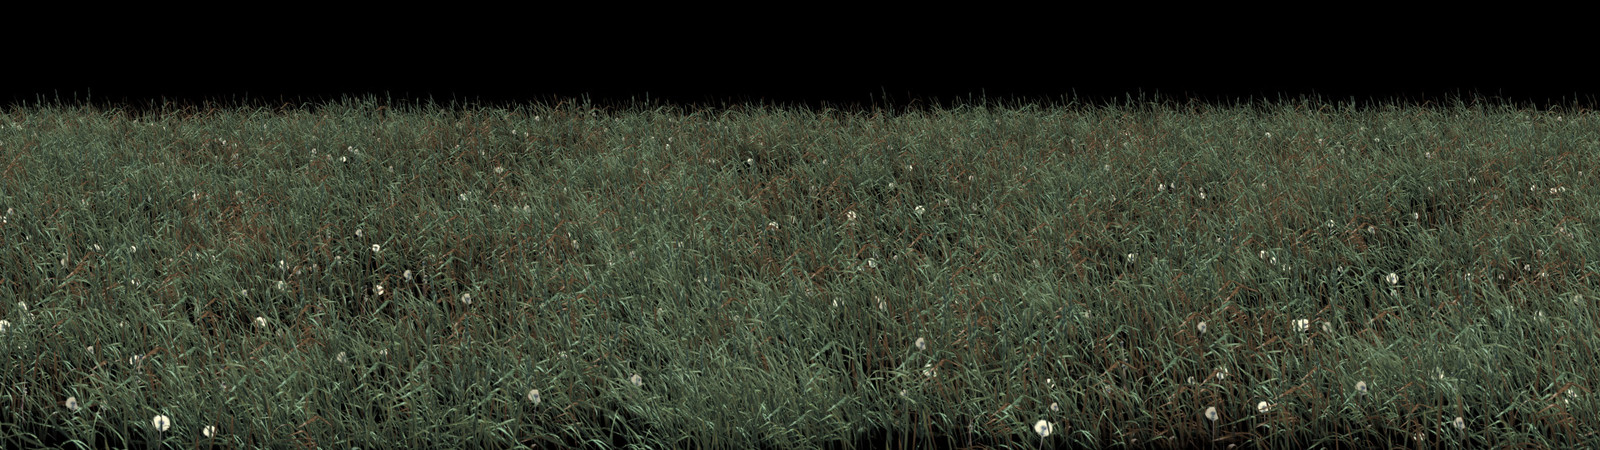 Piece of grass patch, full res